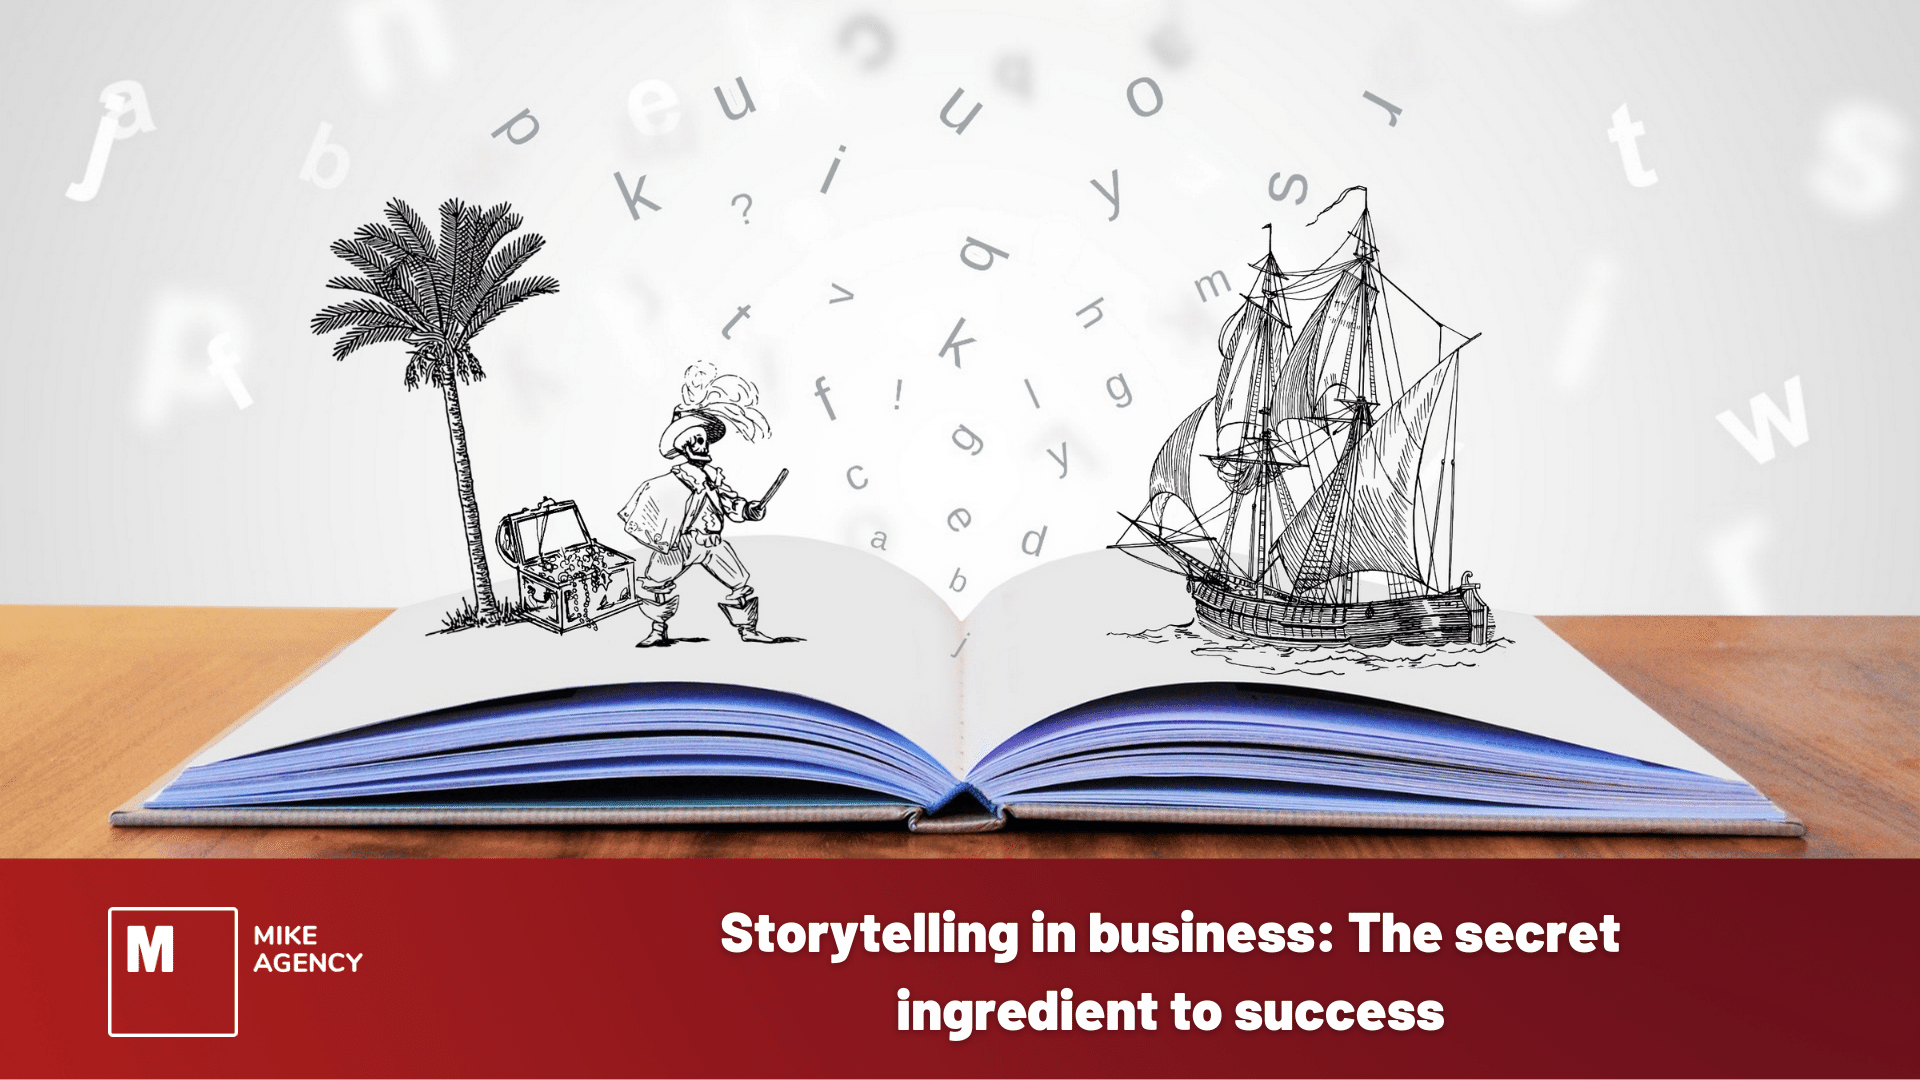 Storytelling in business: The secret ingredient to success